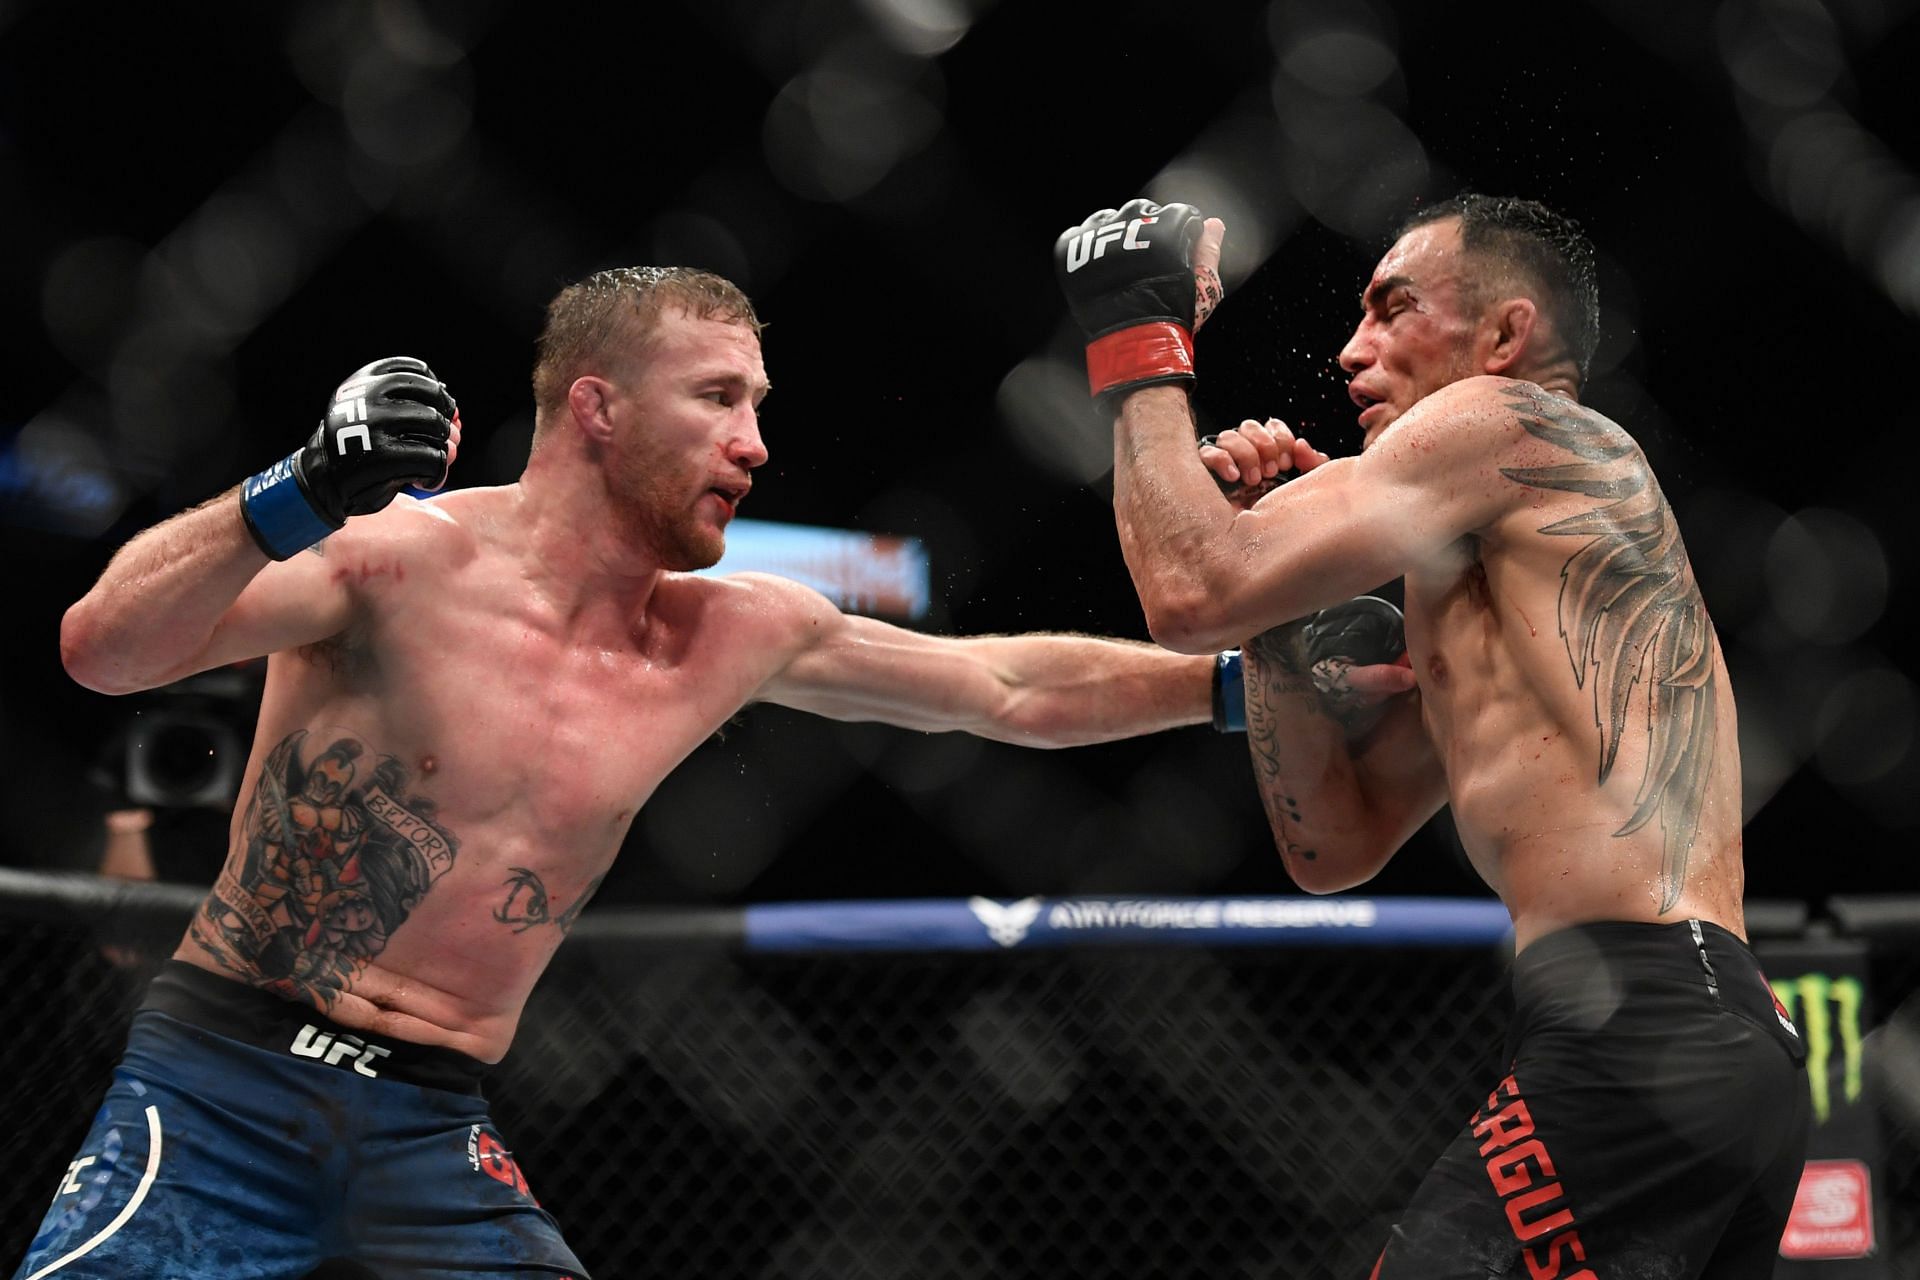 Justin Gaethje faces Michael Chandler in a major lightweight clash at UFC 268